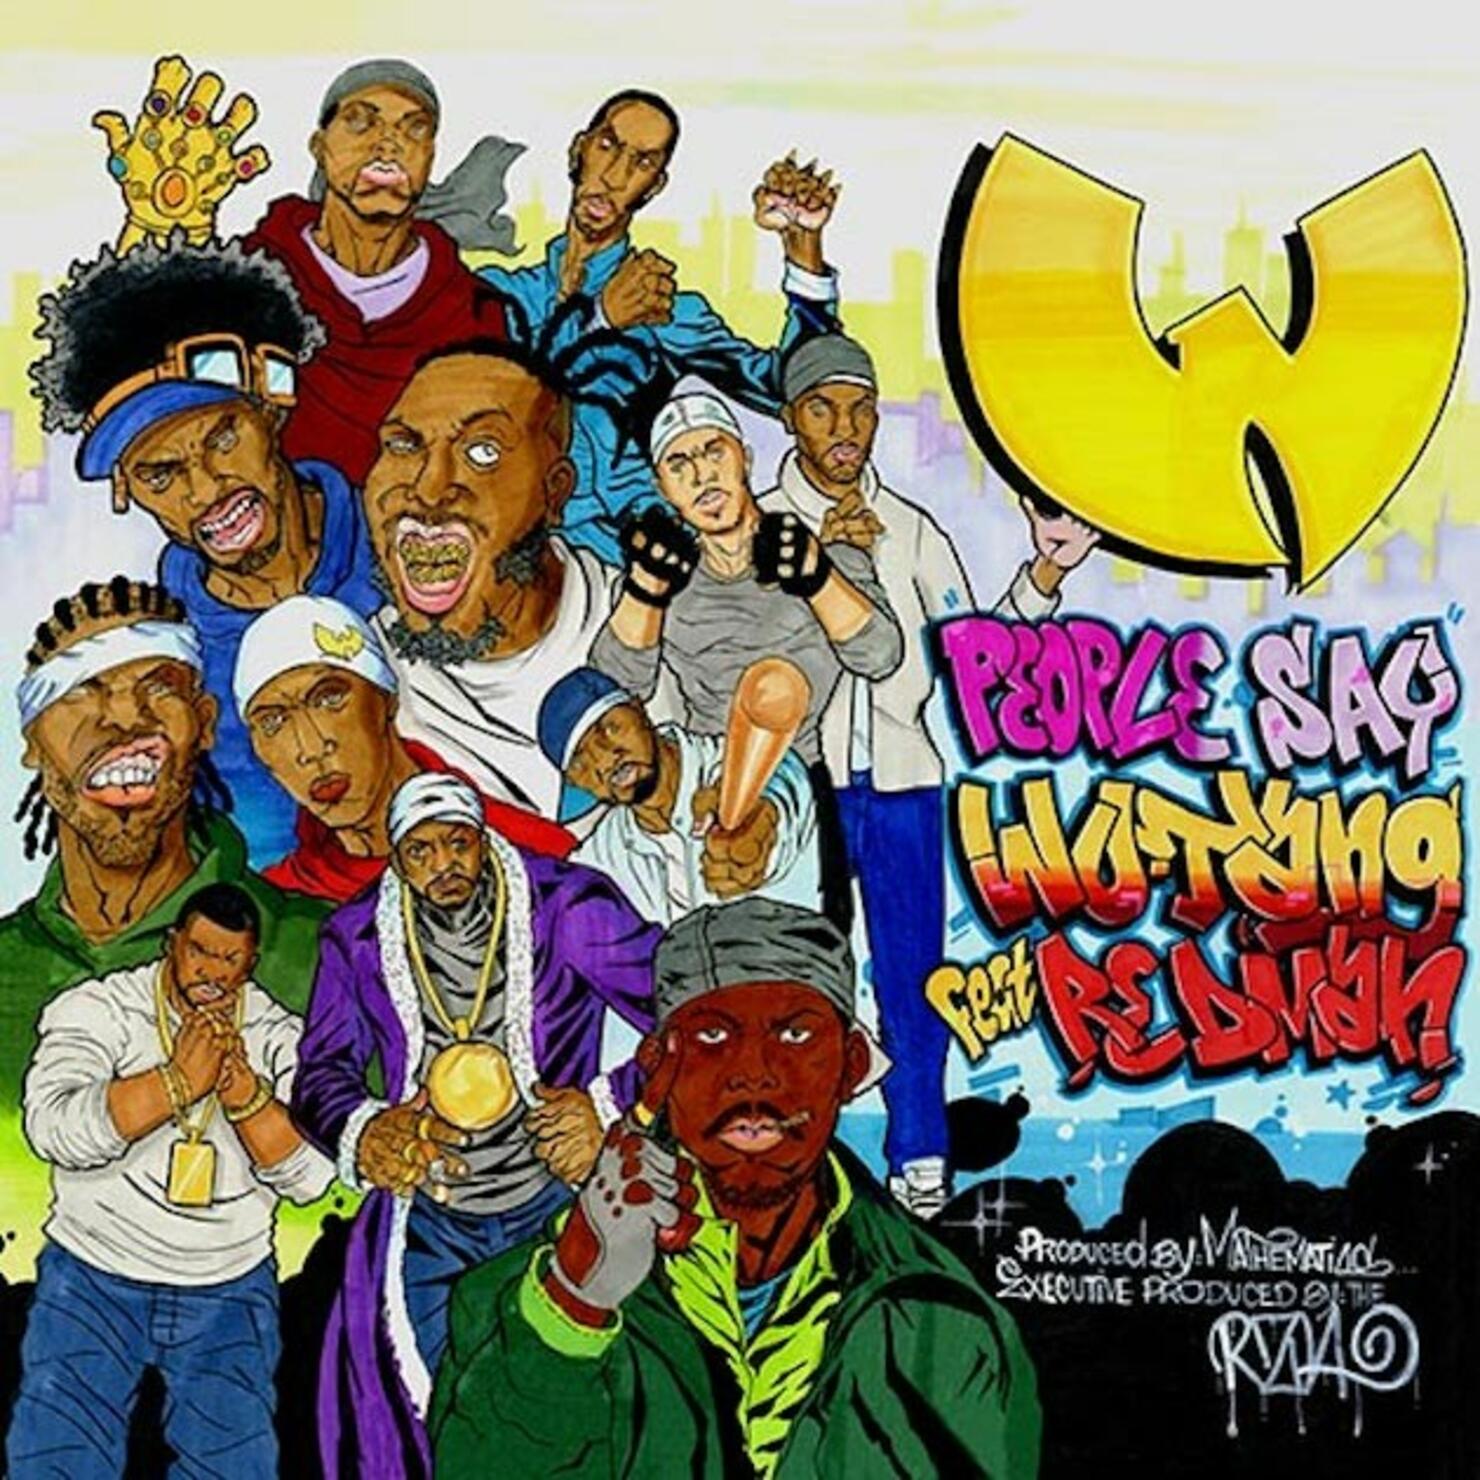 WuTang Drop "People Say" With Redman, New Album Out In October iHeart